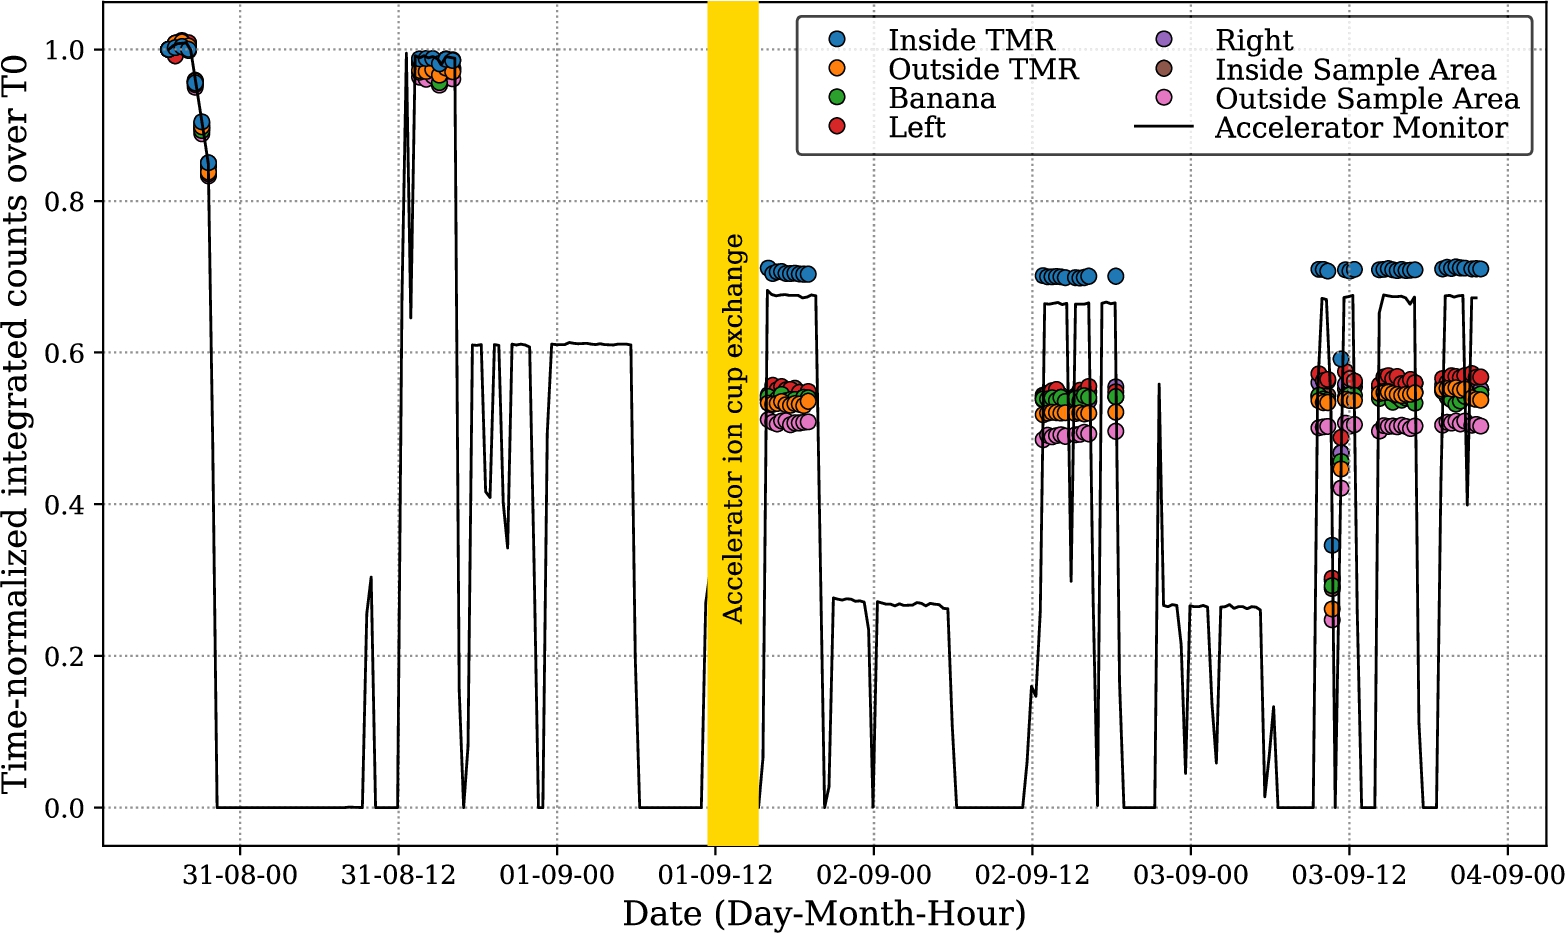 Plot showing the correlation between the accelerator monitor counts and all the other monitors. The counts are normalized by both the running time and the counts for the first run at T0. The time window for the exchange of the accelerator cup is shown. The lower peaks in-between the HighNESS experiment correspond to the shorter pulse length regime.